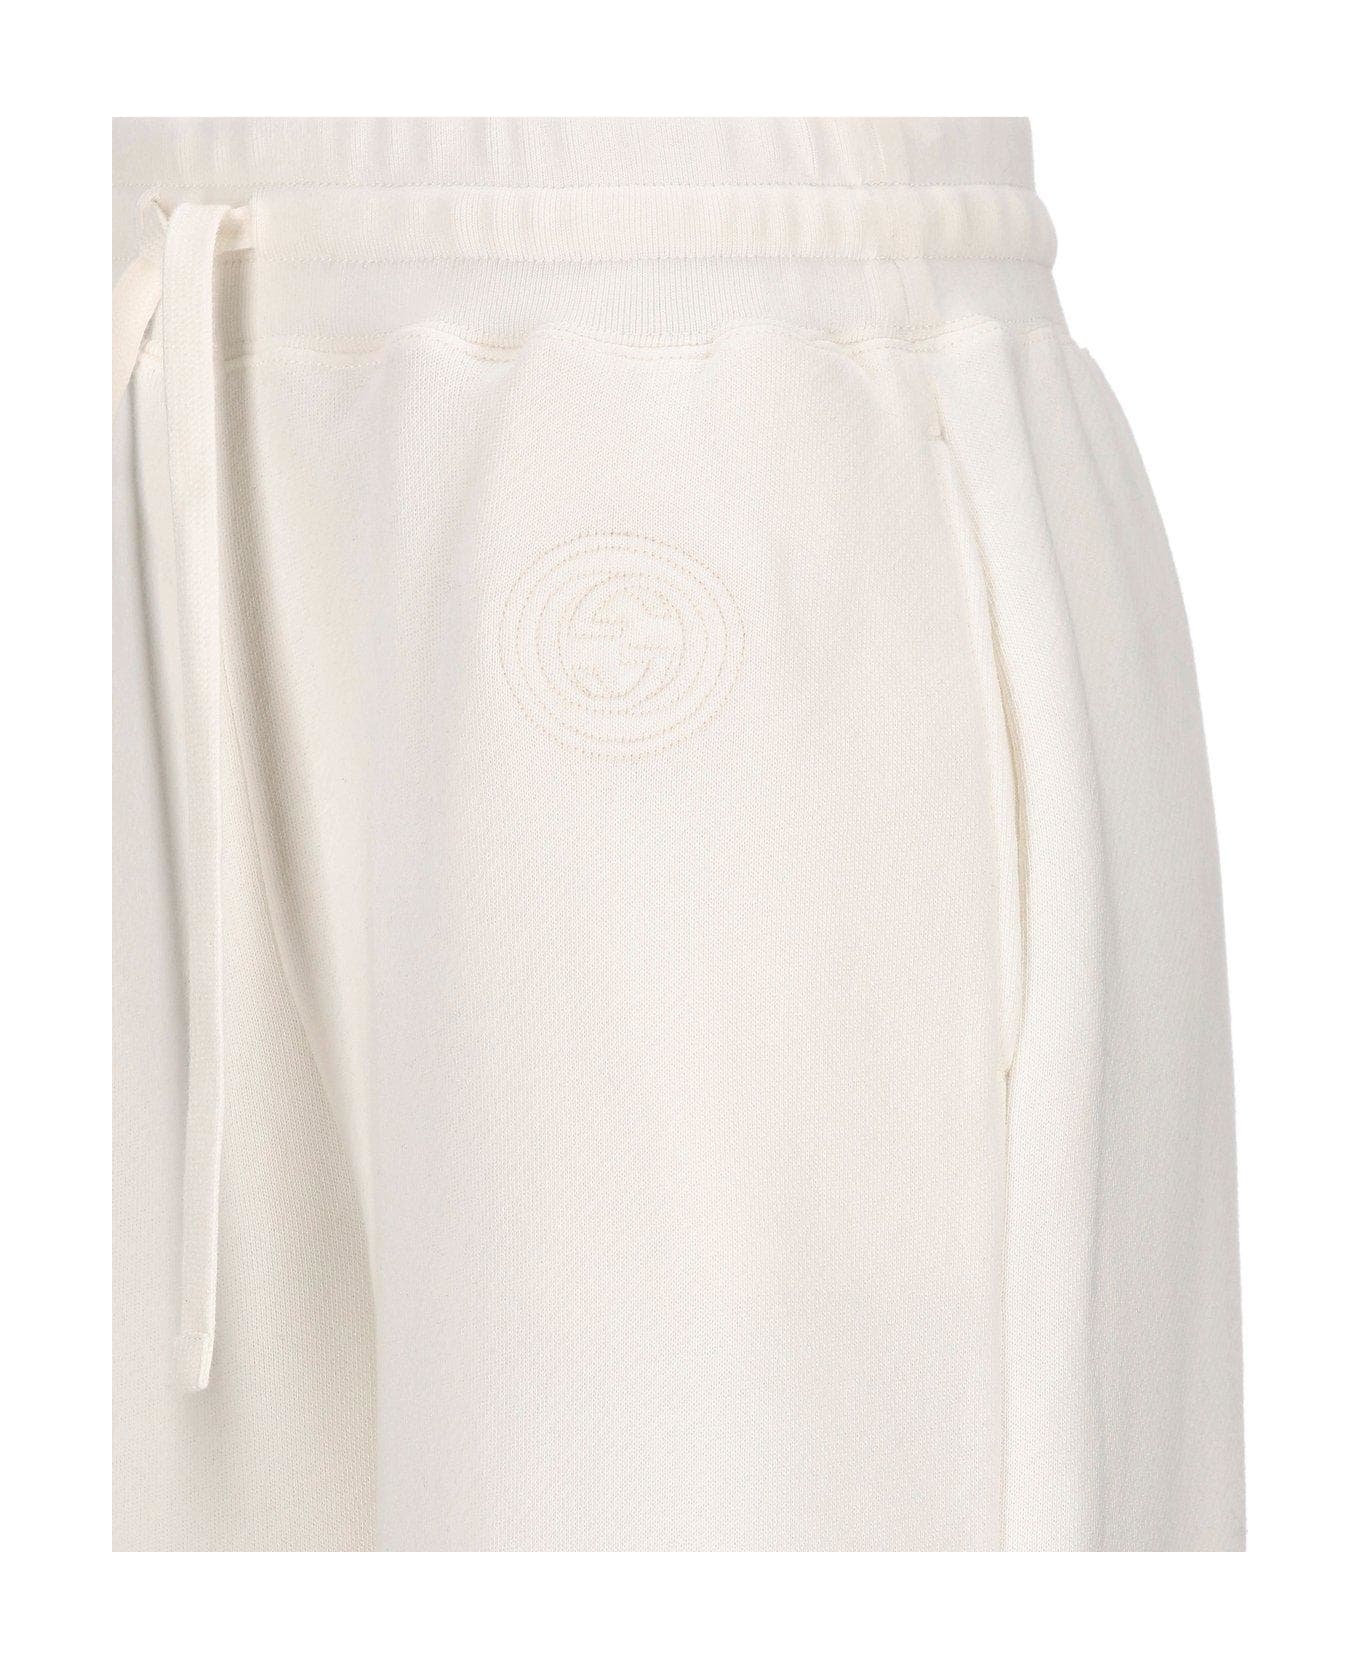 Gucci Interlocking G Embroidered Jersey Trousers - White ボトムス